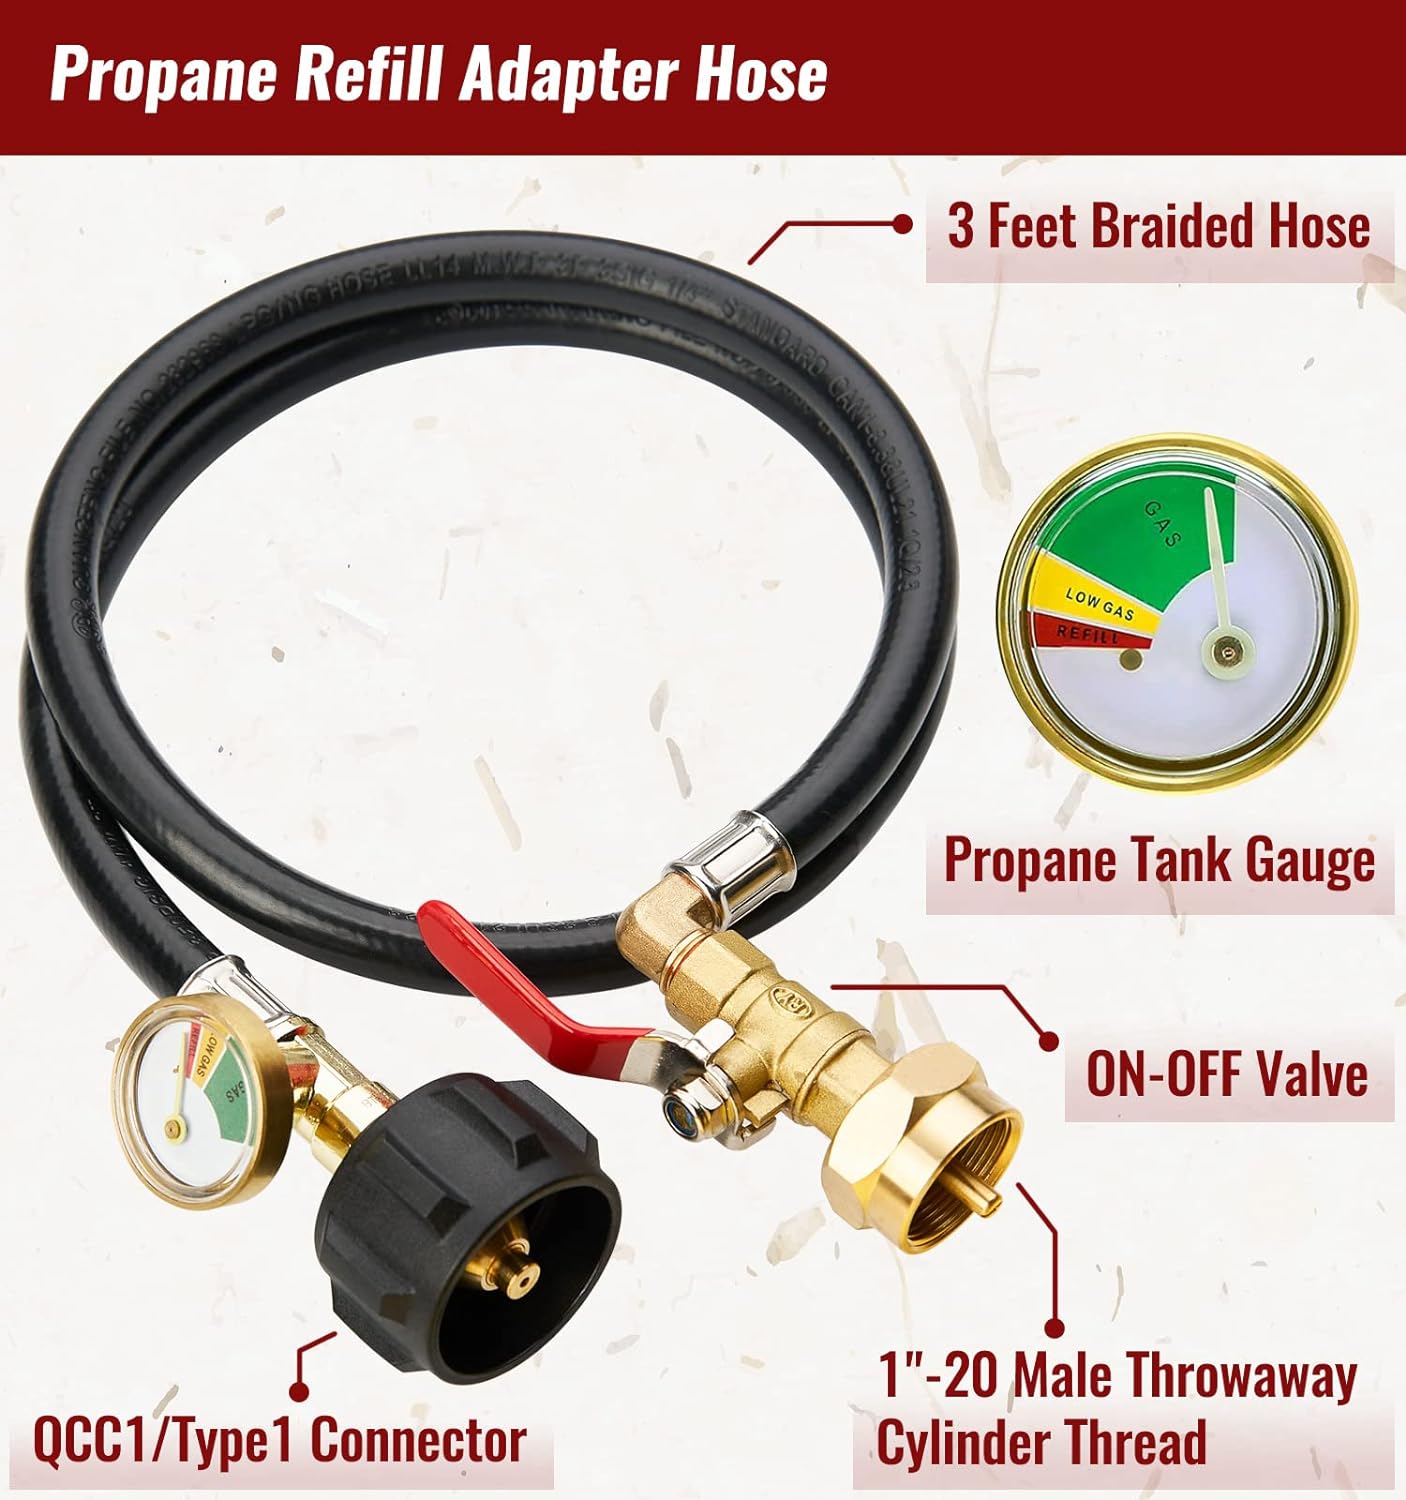 3 Feet Propane Refill Adapter Hose with Gauge & ON/OFF Control Valve.